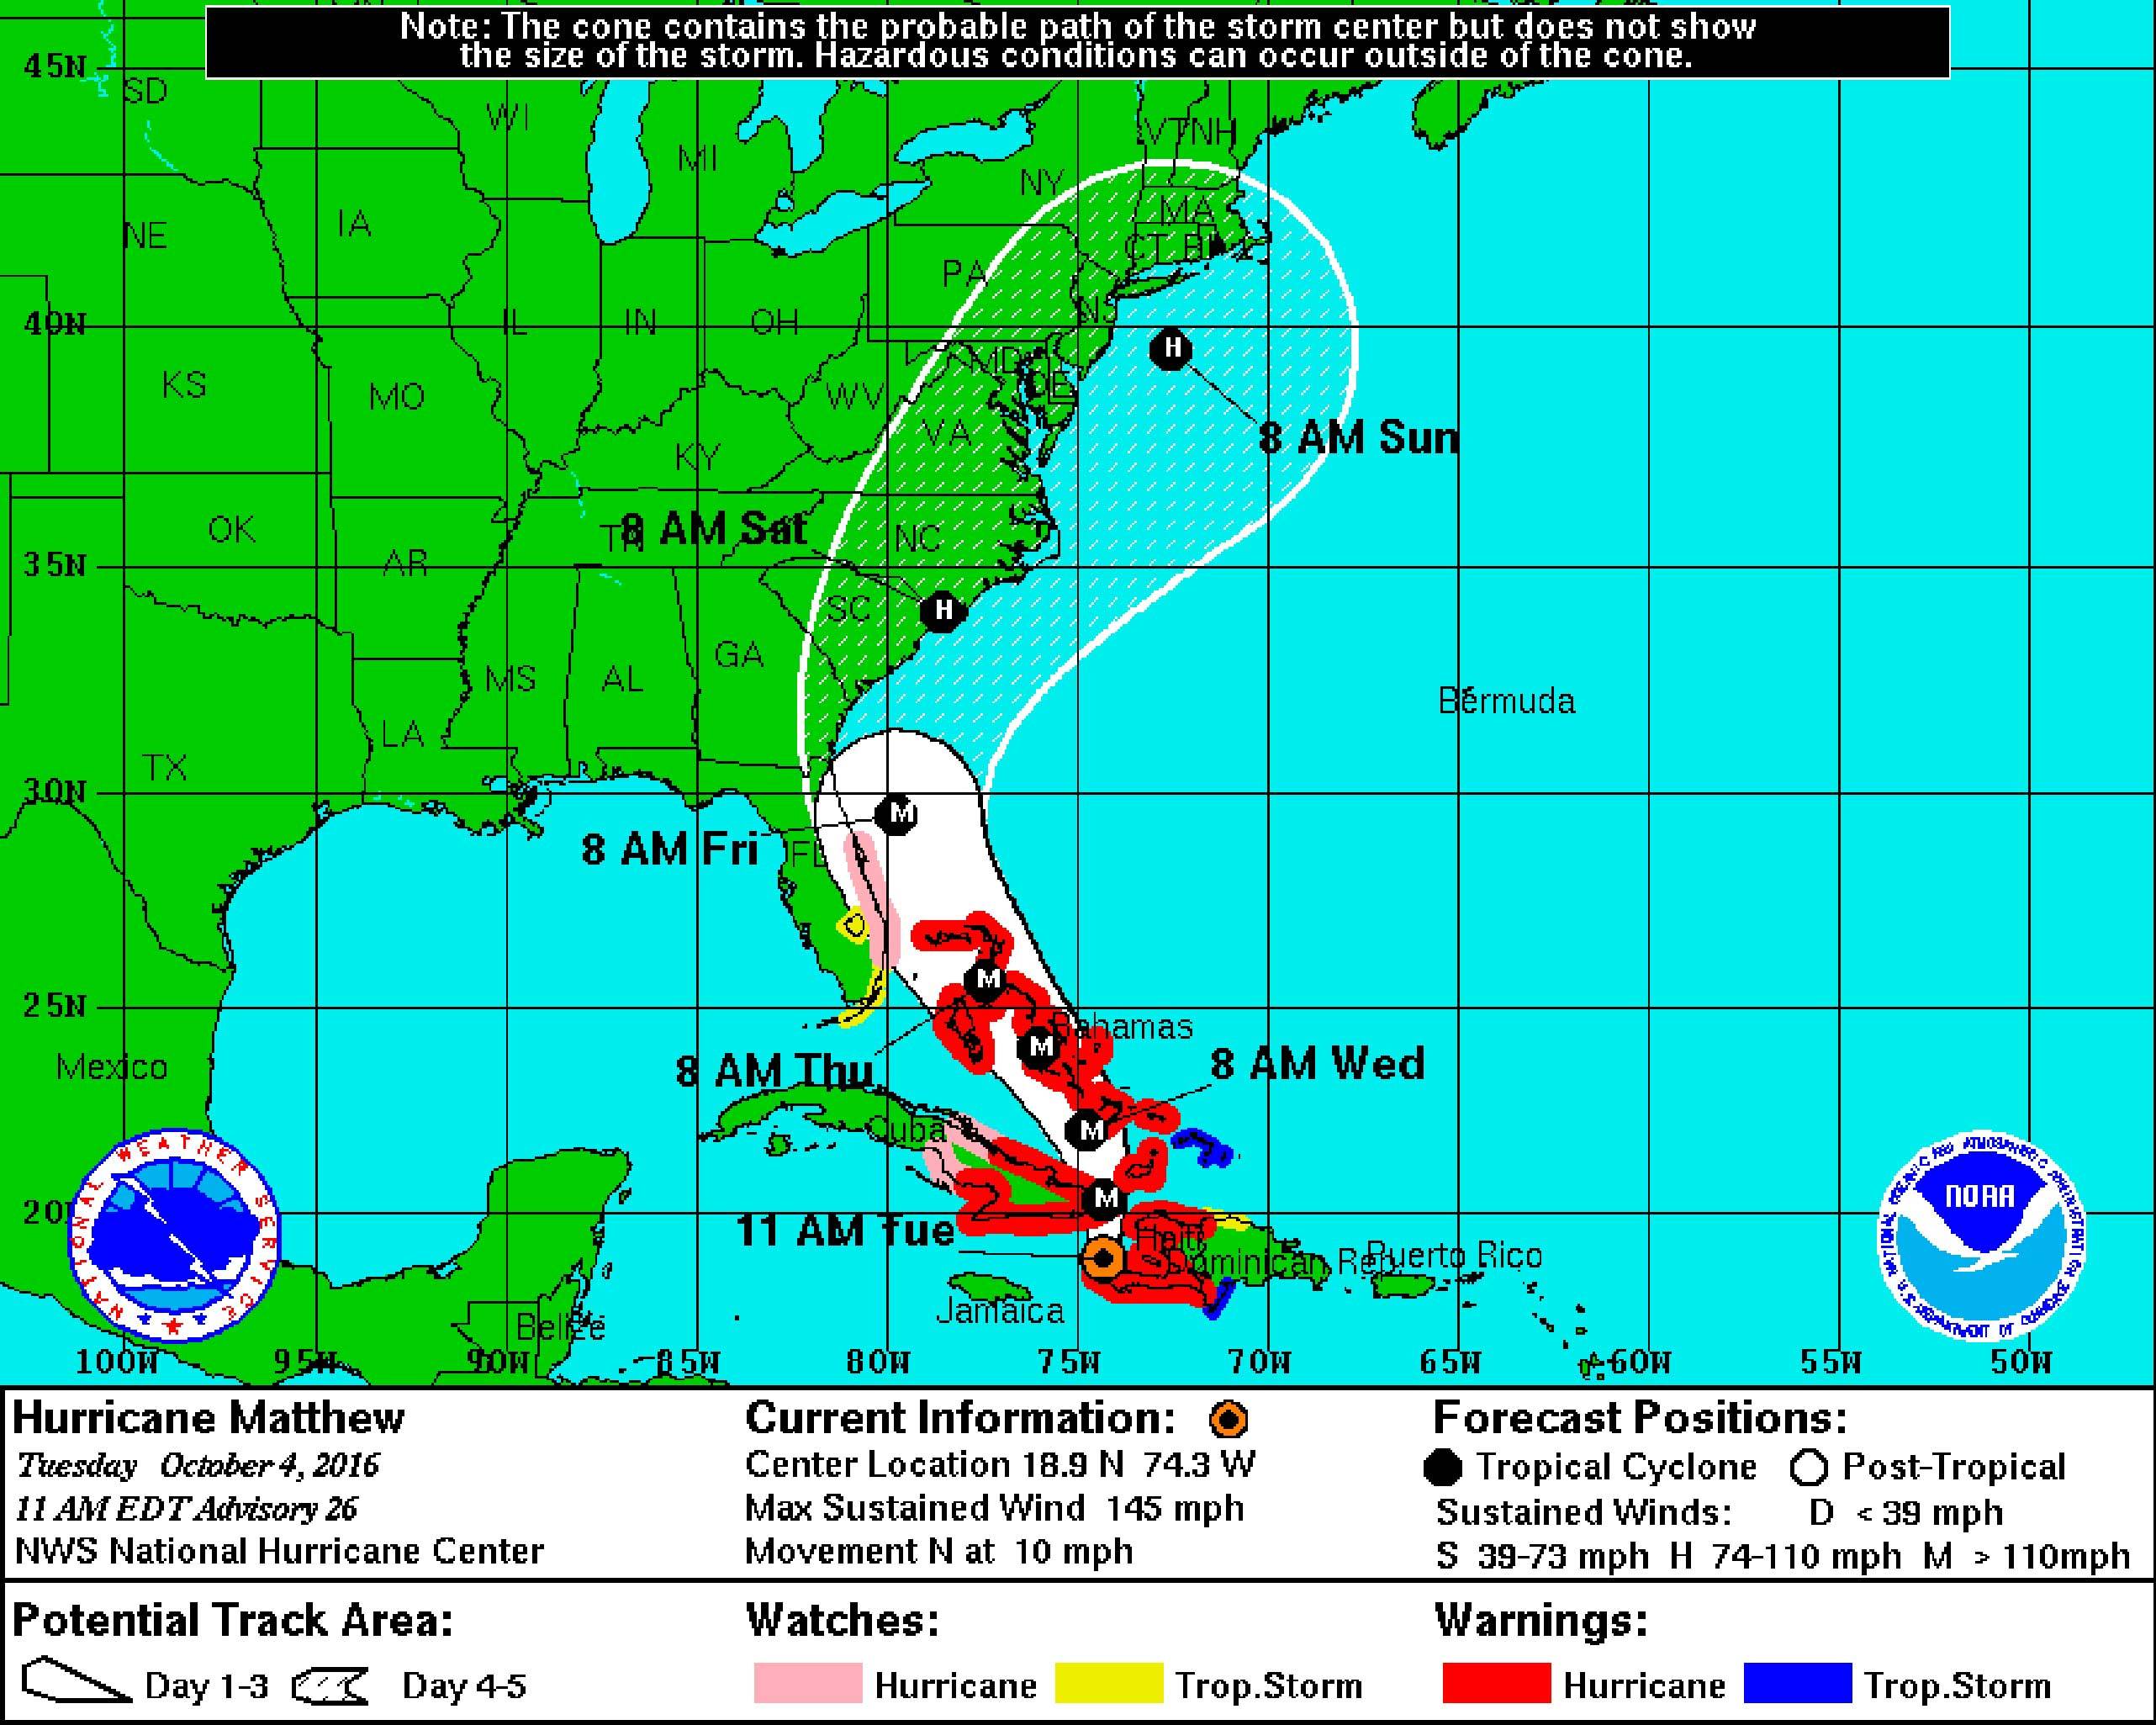 Hurricane Warning issued for the theme park areas